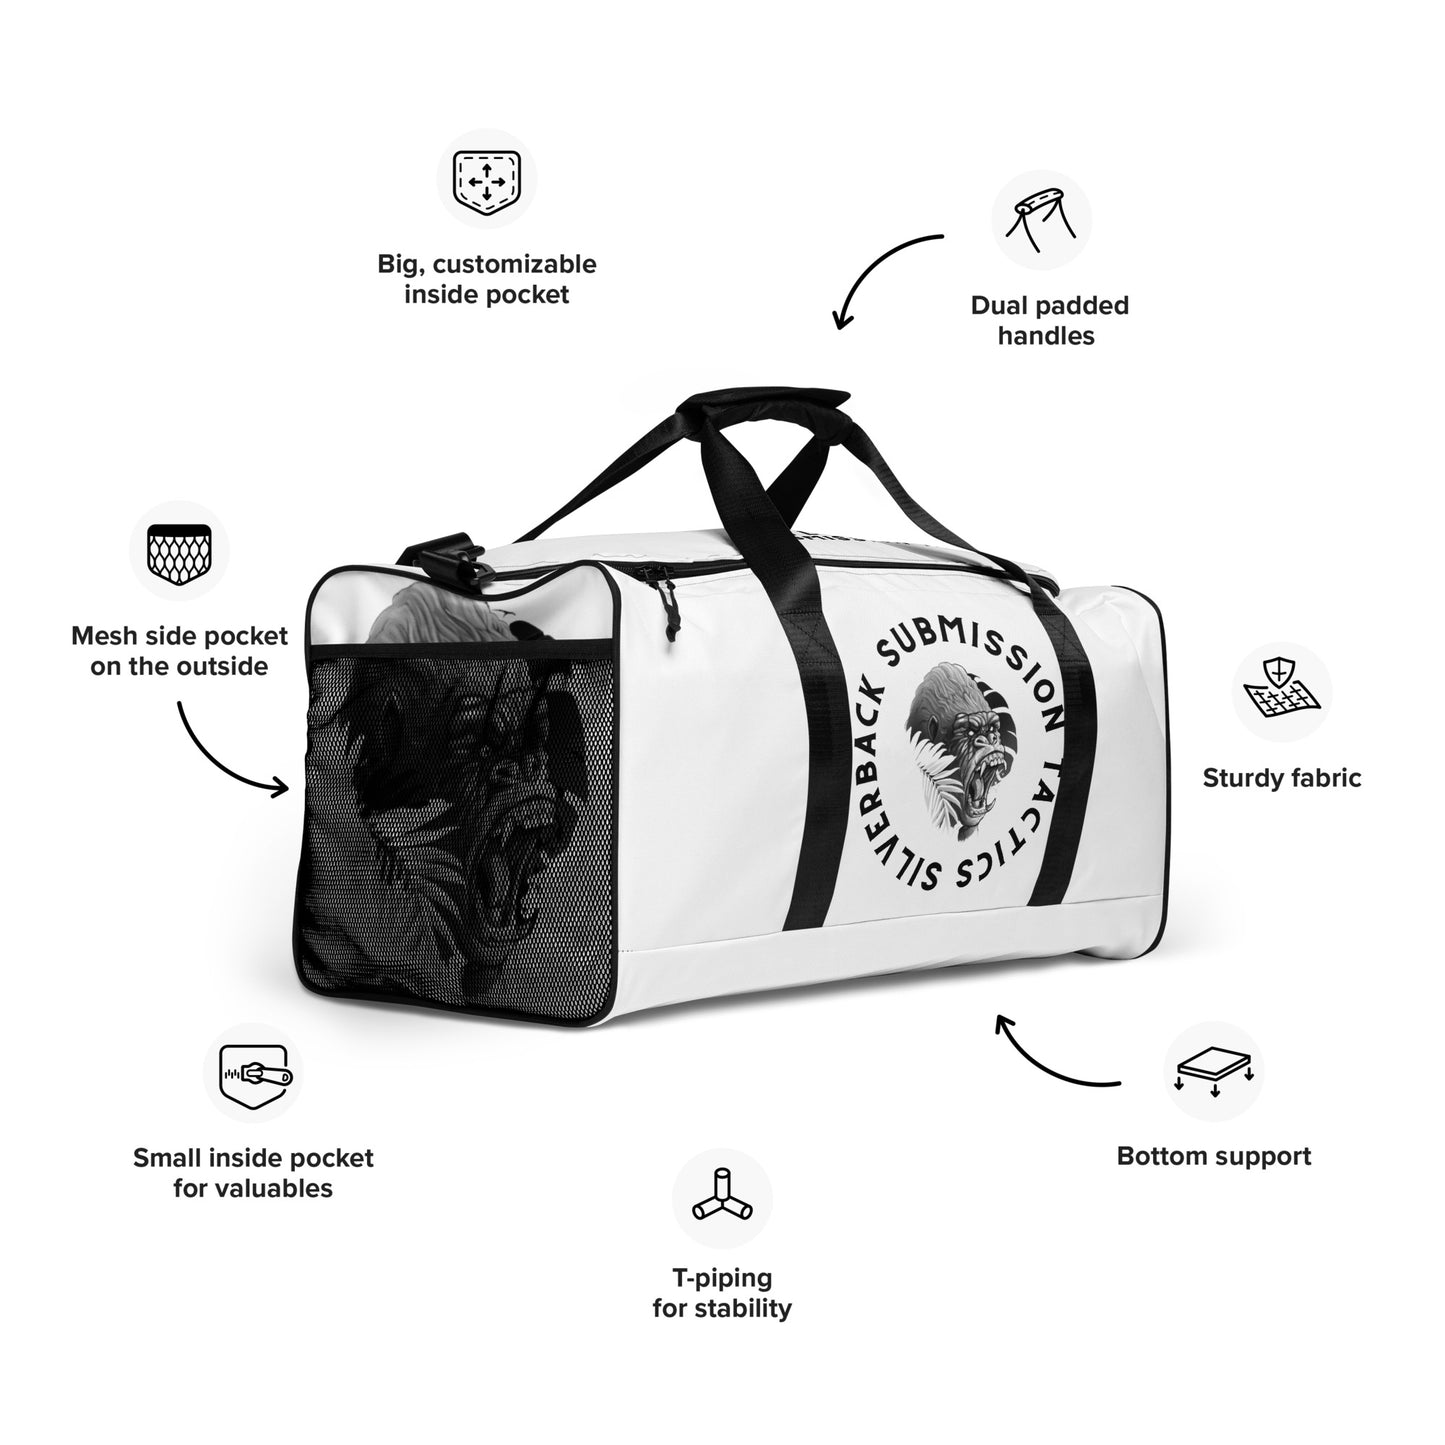 Silverback Submission Tactics Gym Bag